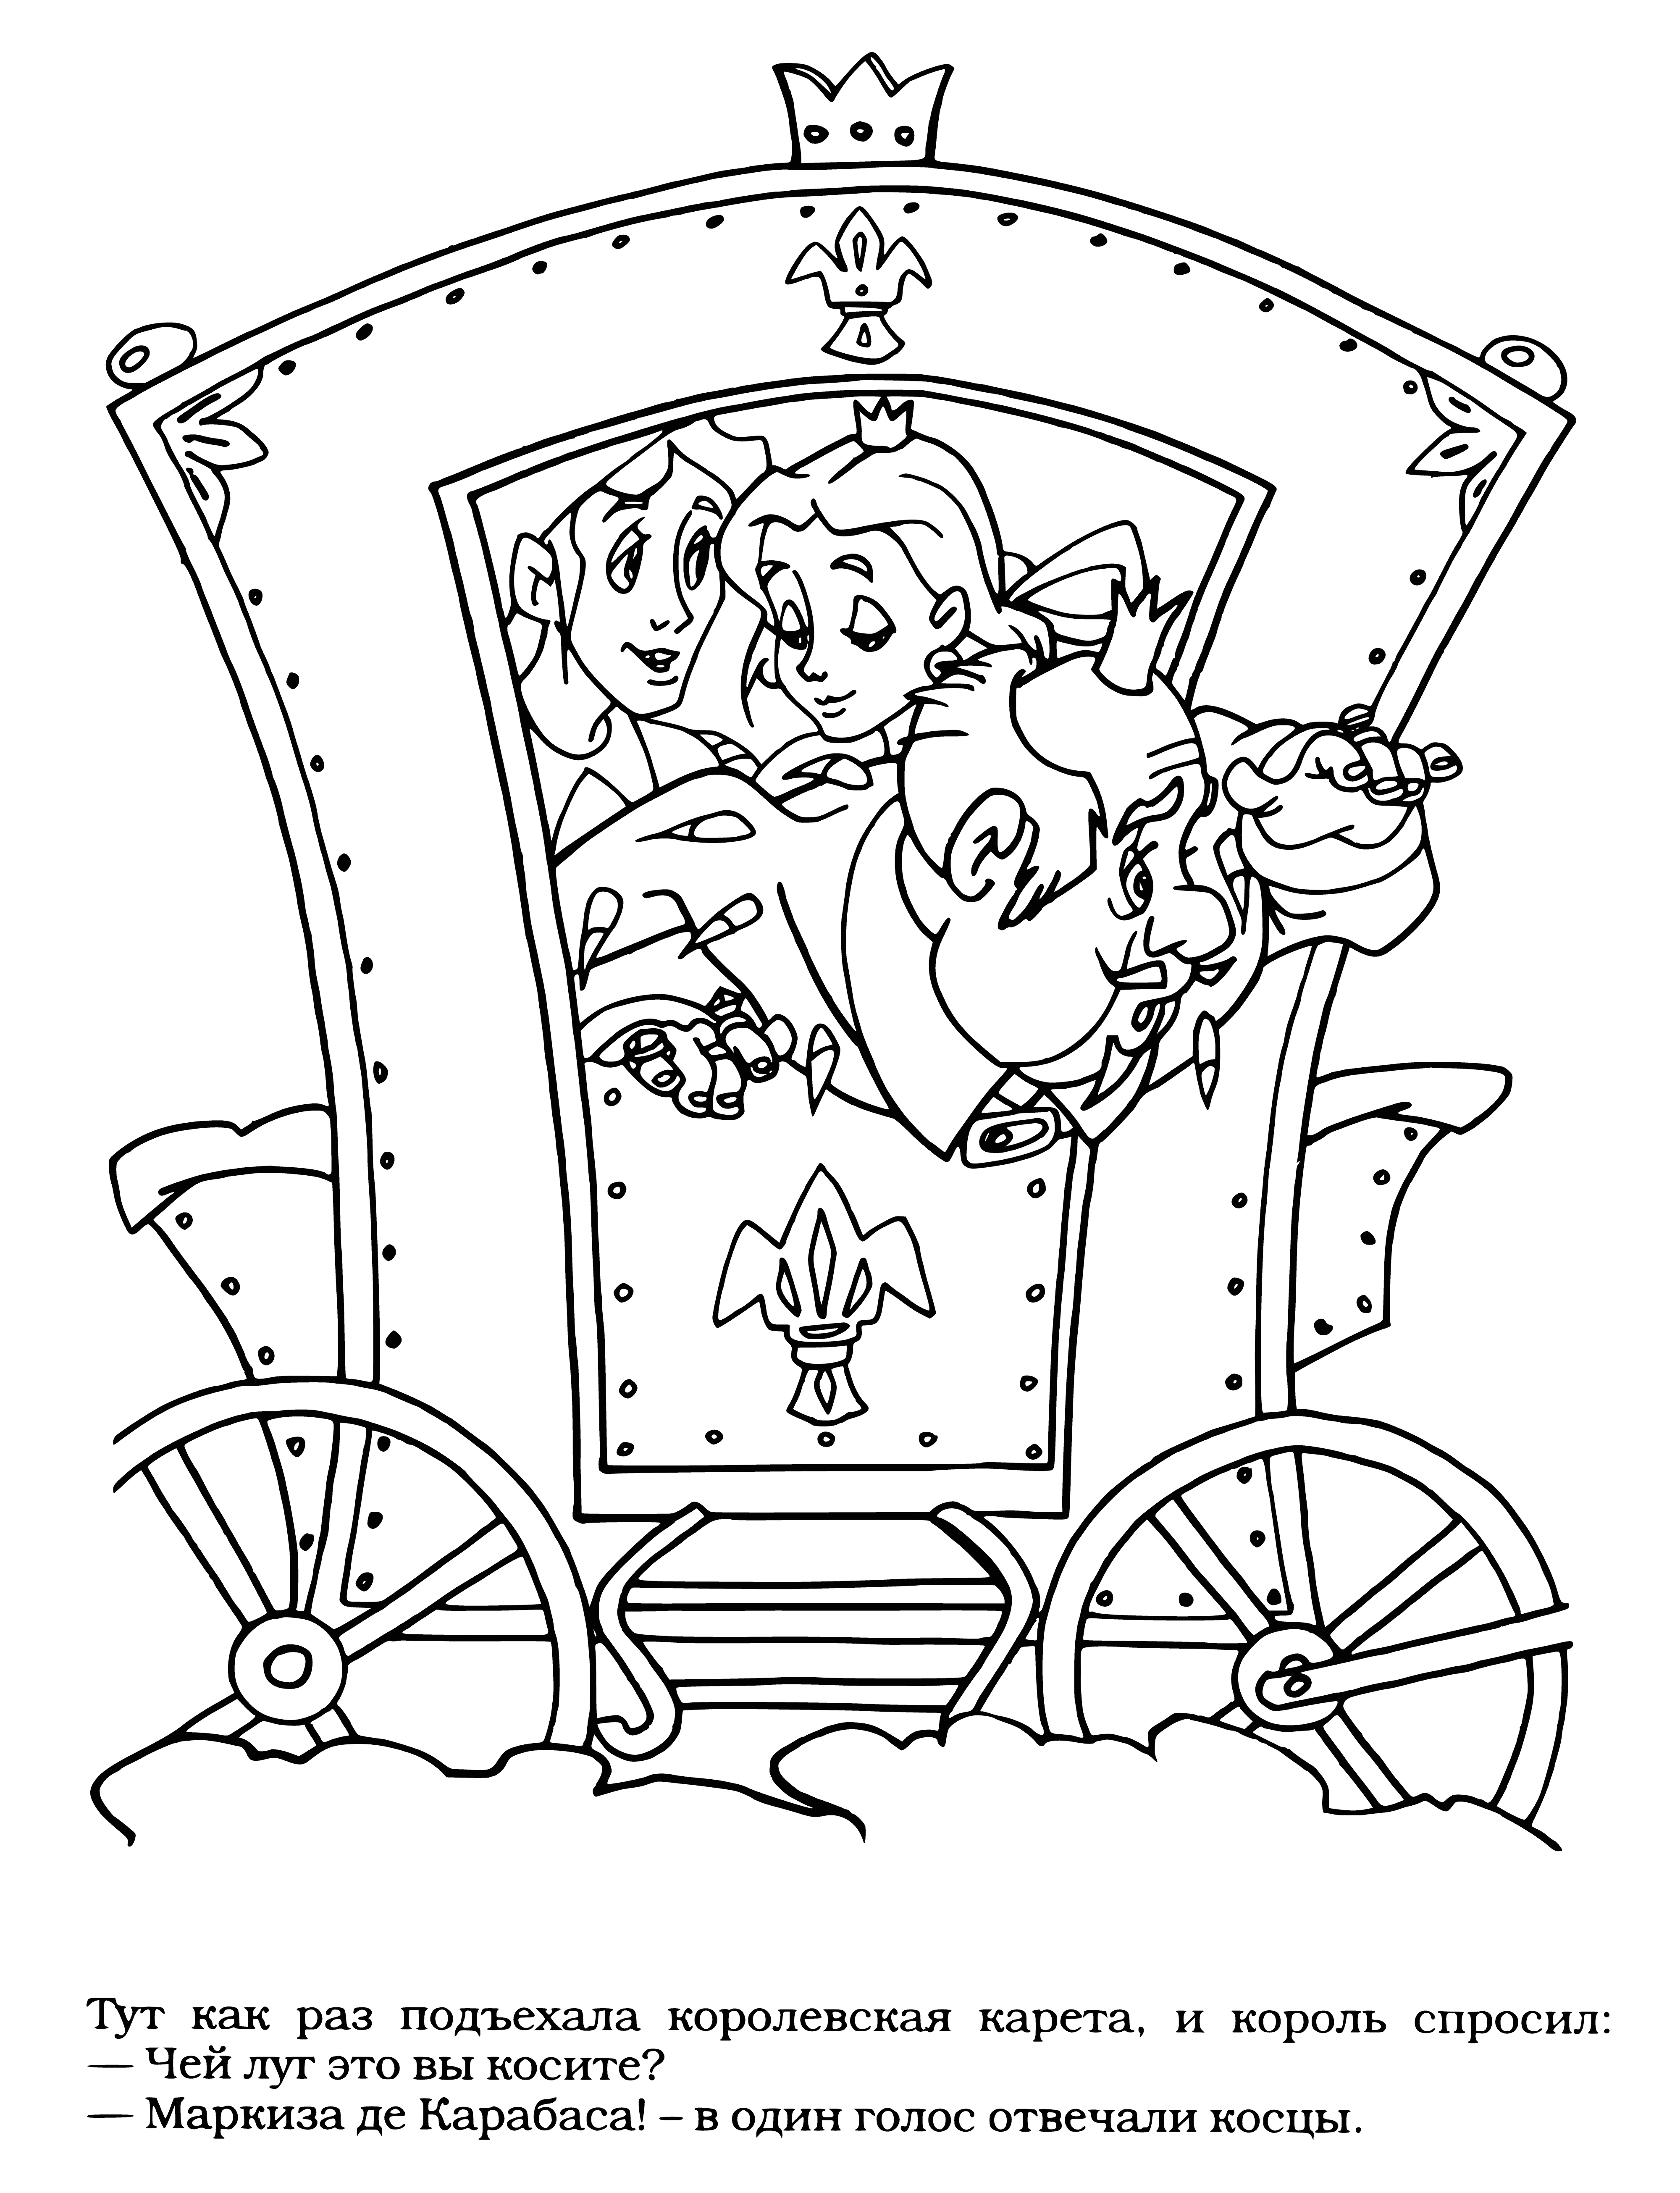 coloring page: Woman in carriage reads a book while wearing a large hat. #classiclook #literature